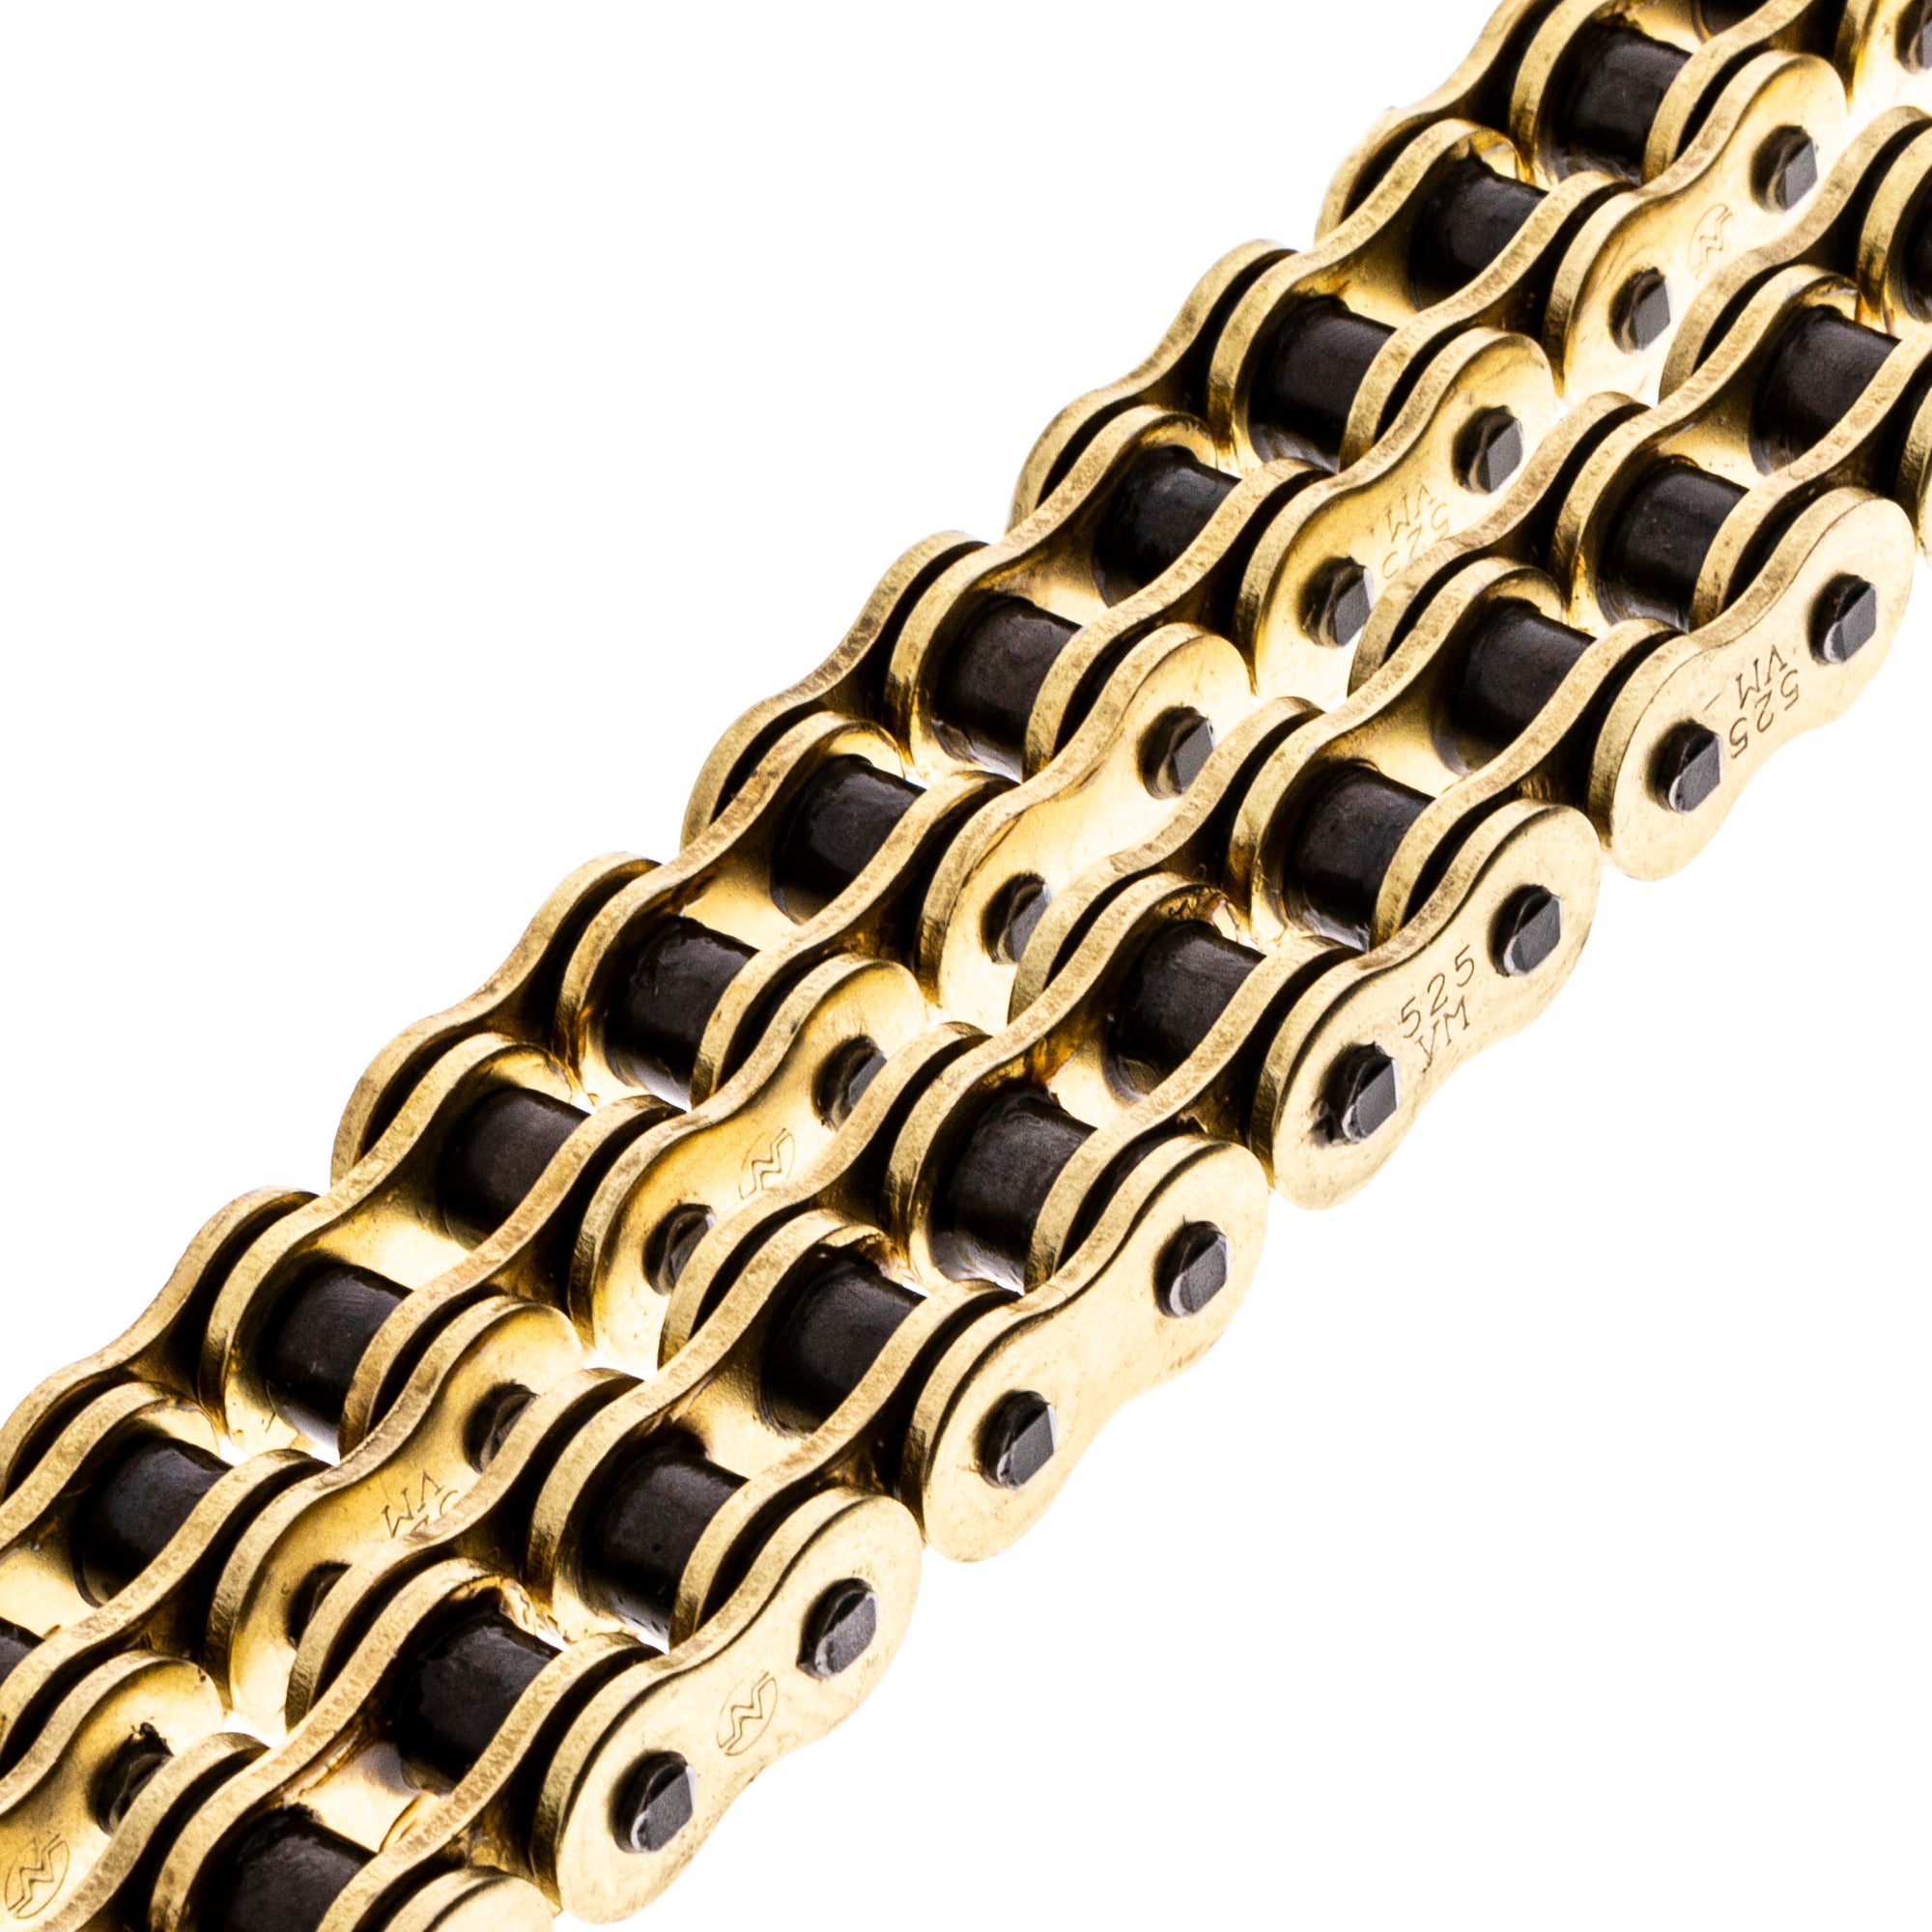 Gold X-Ring Chain 94 w/ Master Link for zOTHER Ducati 67640211A 5521 525VX-94 NICHE 519-CDC2632H